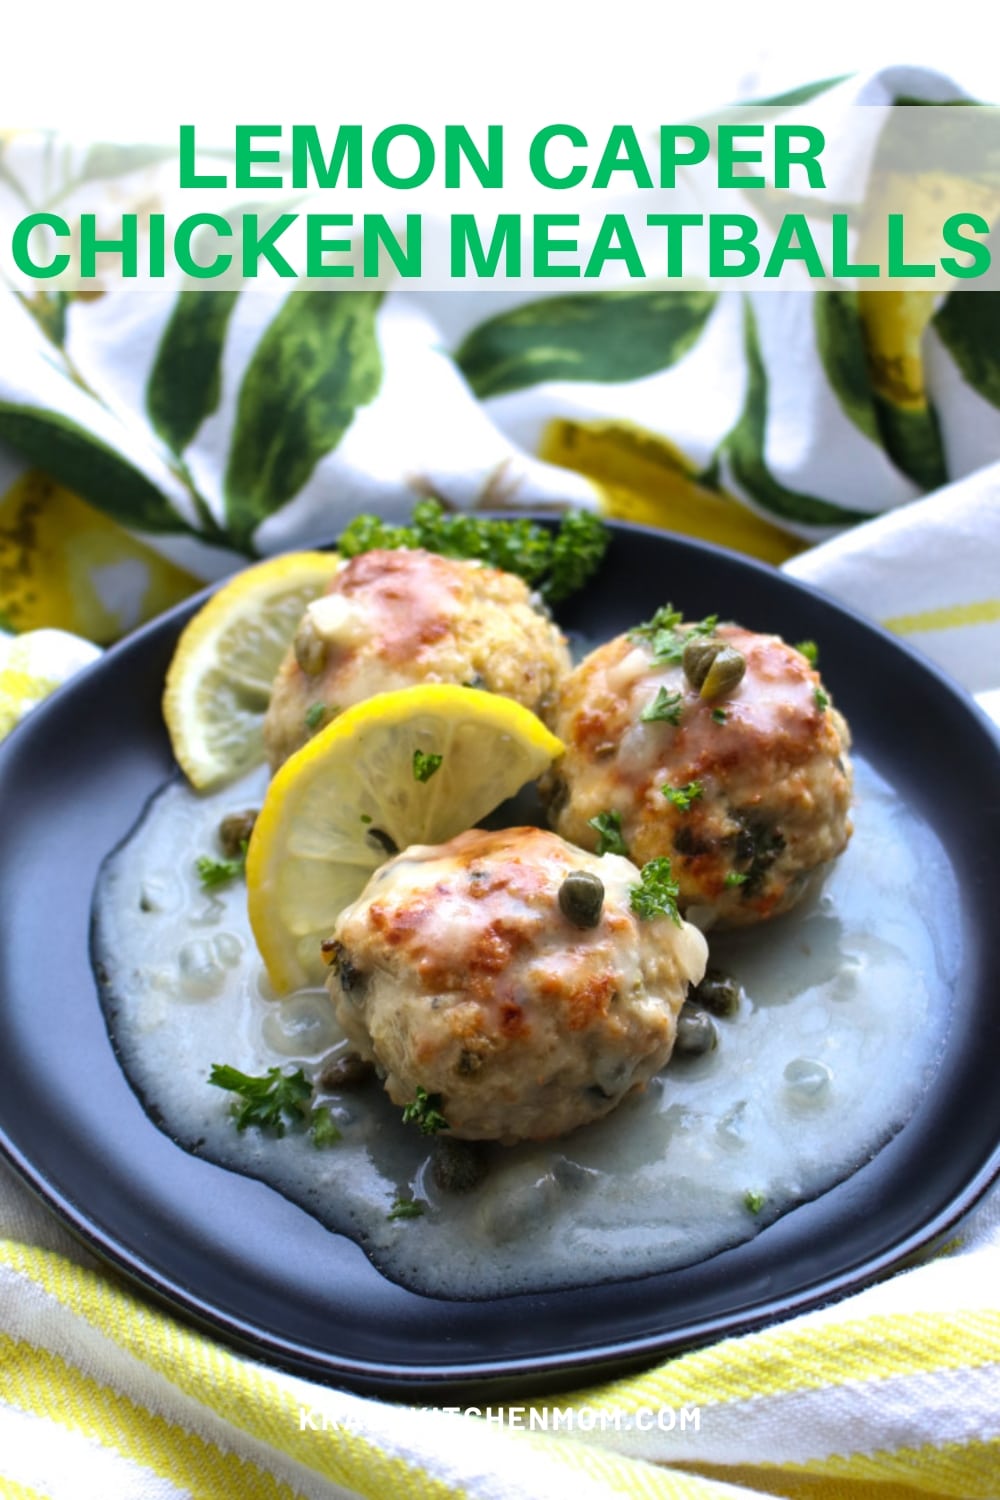 These tender and juicy lemon caper chicken meatballs will tantalize your taste buds! Serve them as an appetizer or a meal with pasta or a salad. via @krazykitchenmom